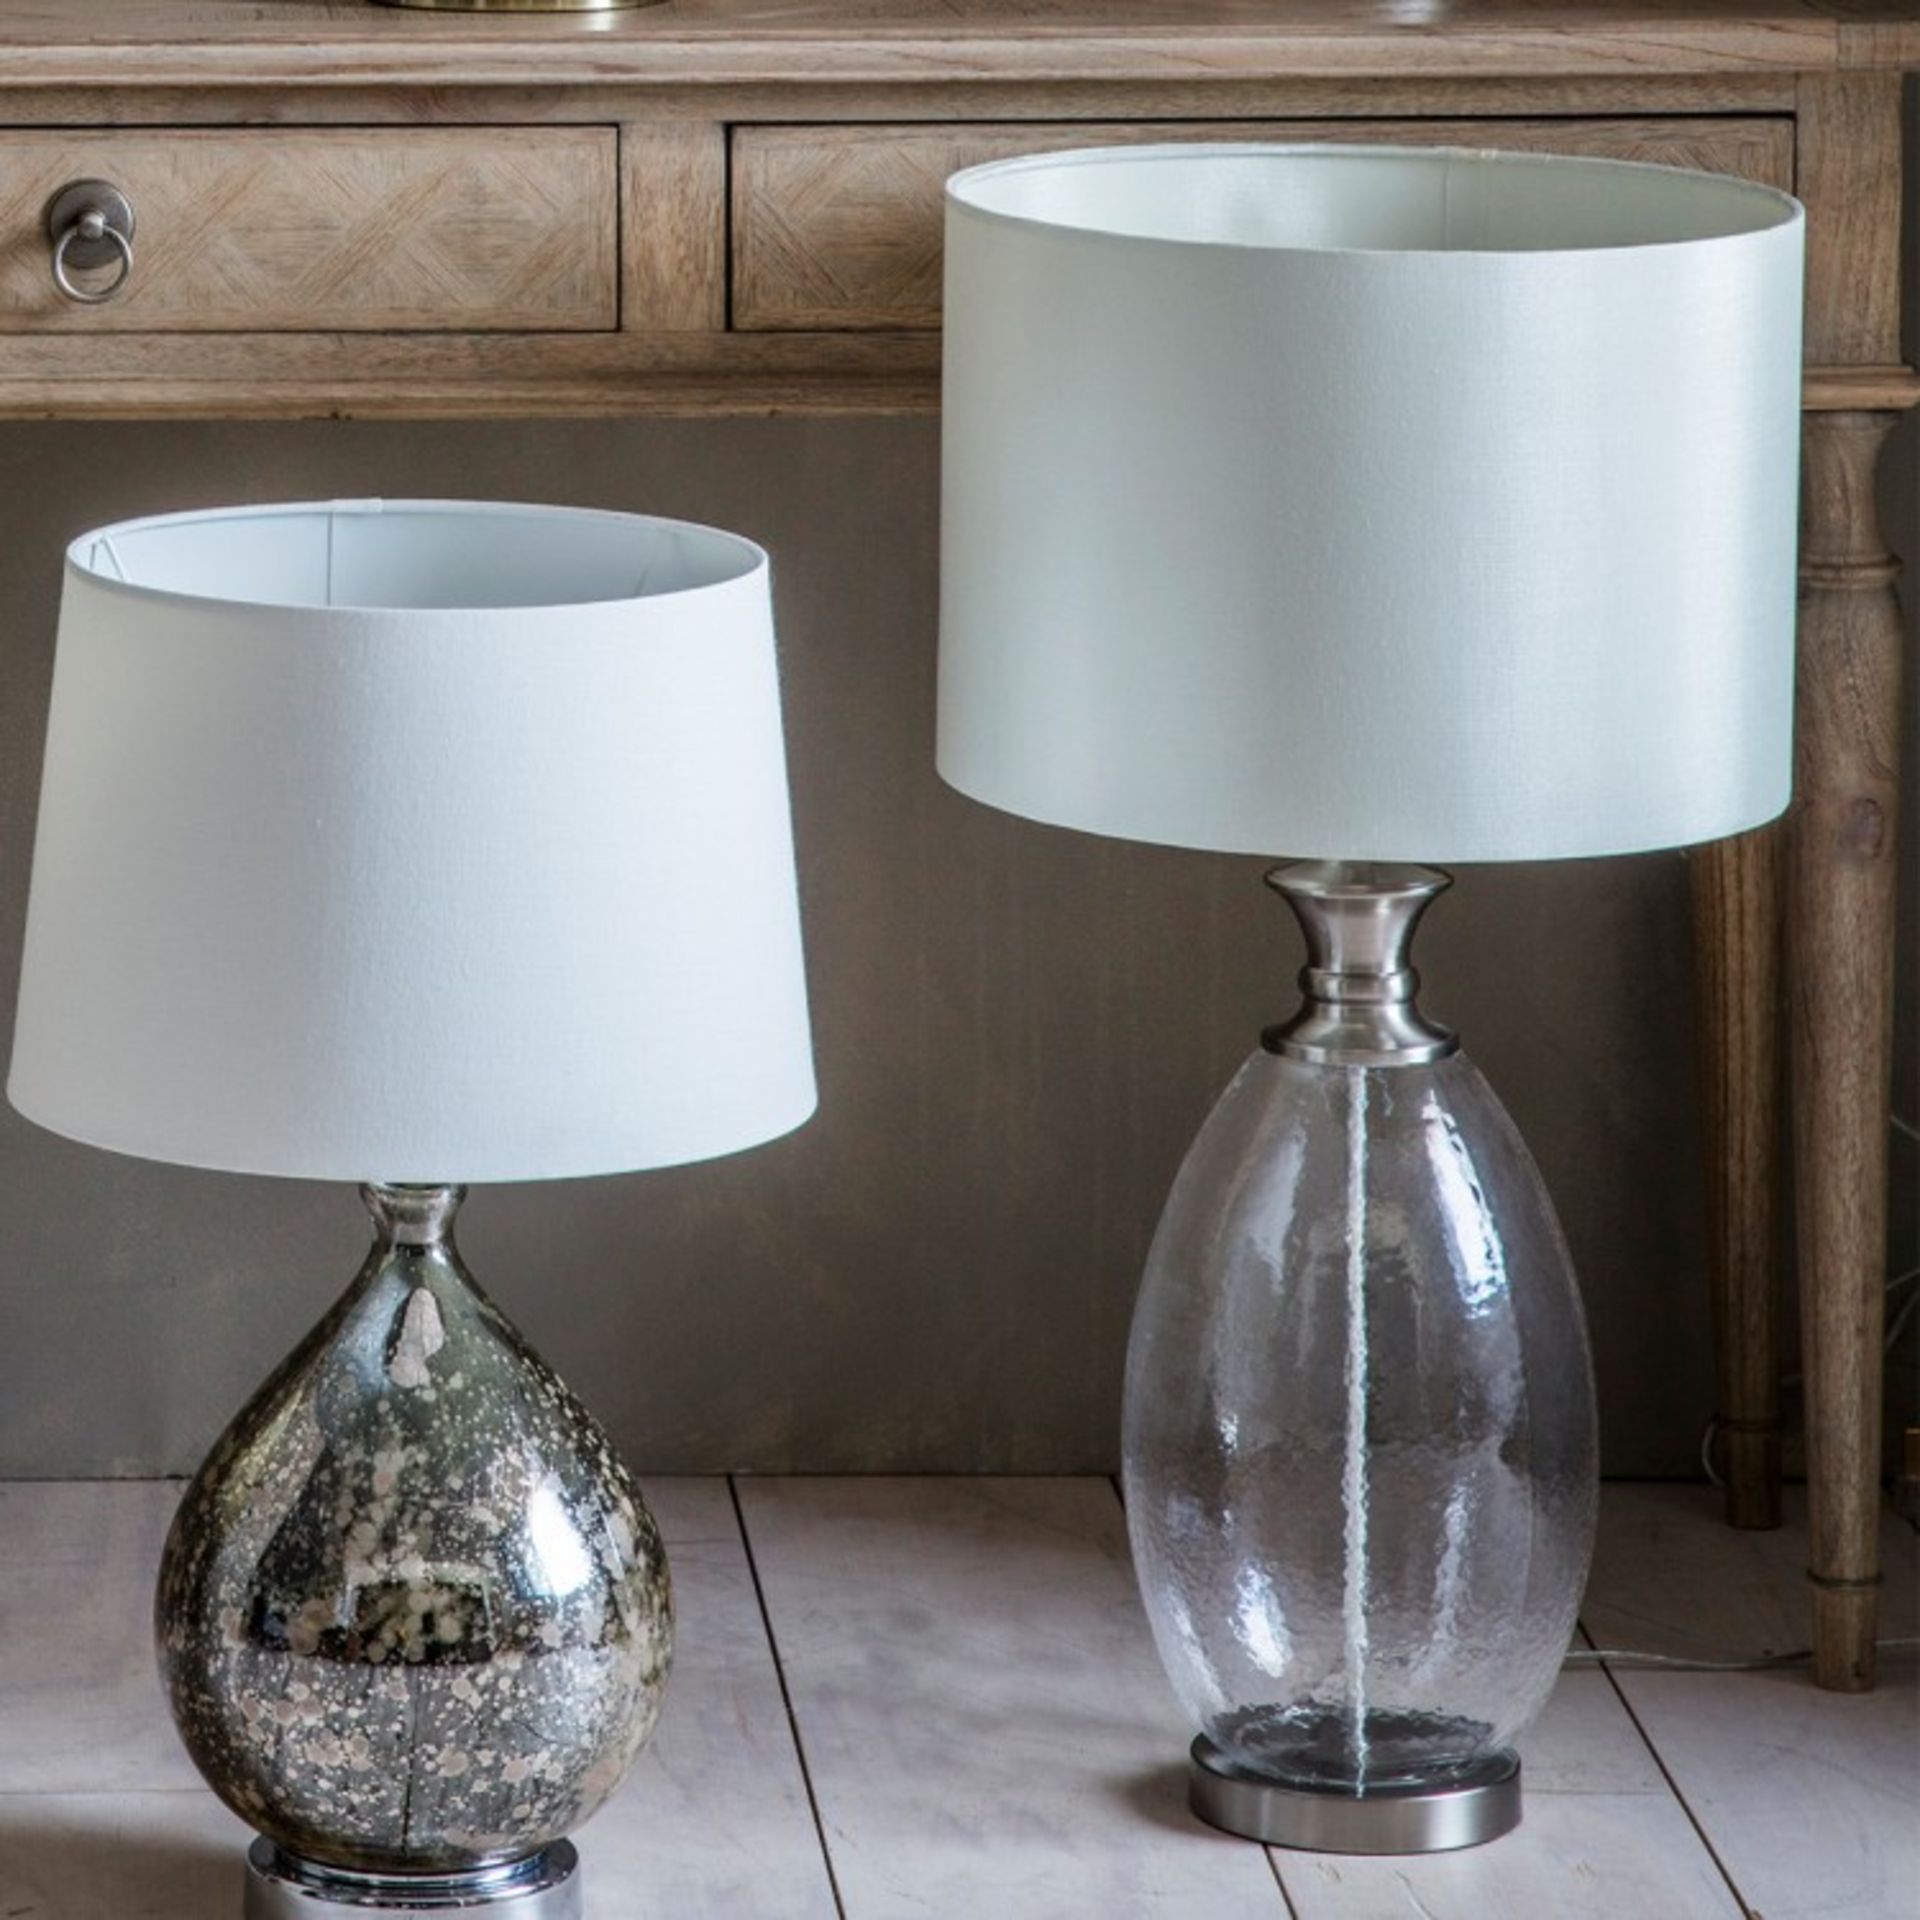 Sulgrave Table Lamp With a clear glass base and a white cylindrical shade, the Sulgrave table lamp